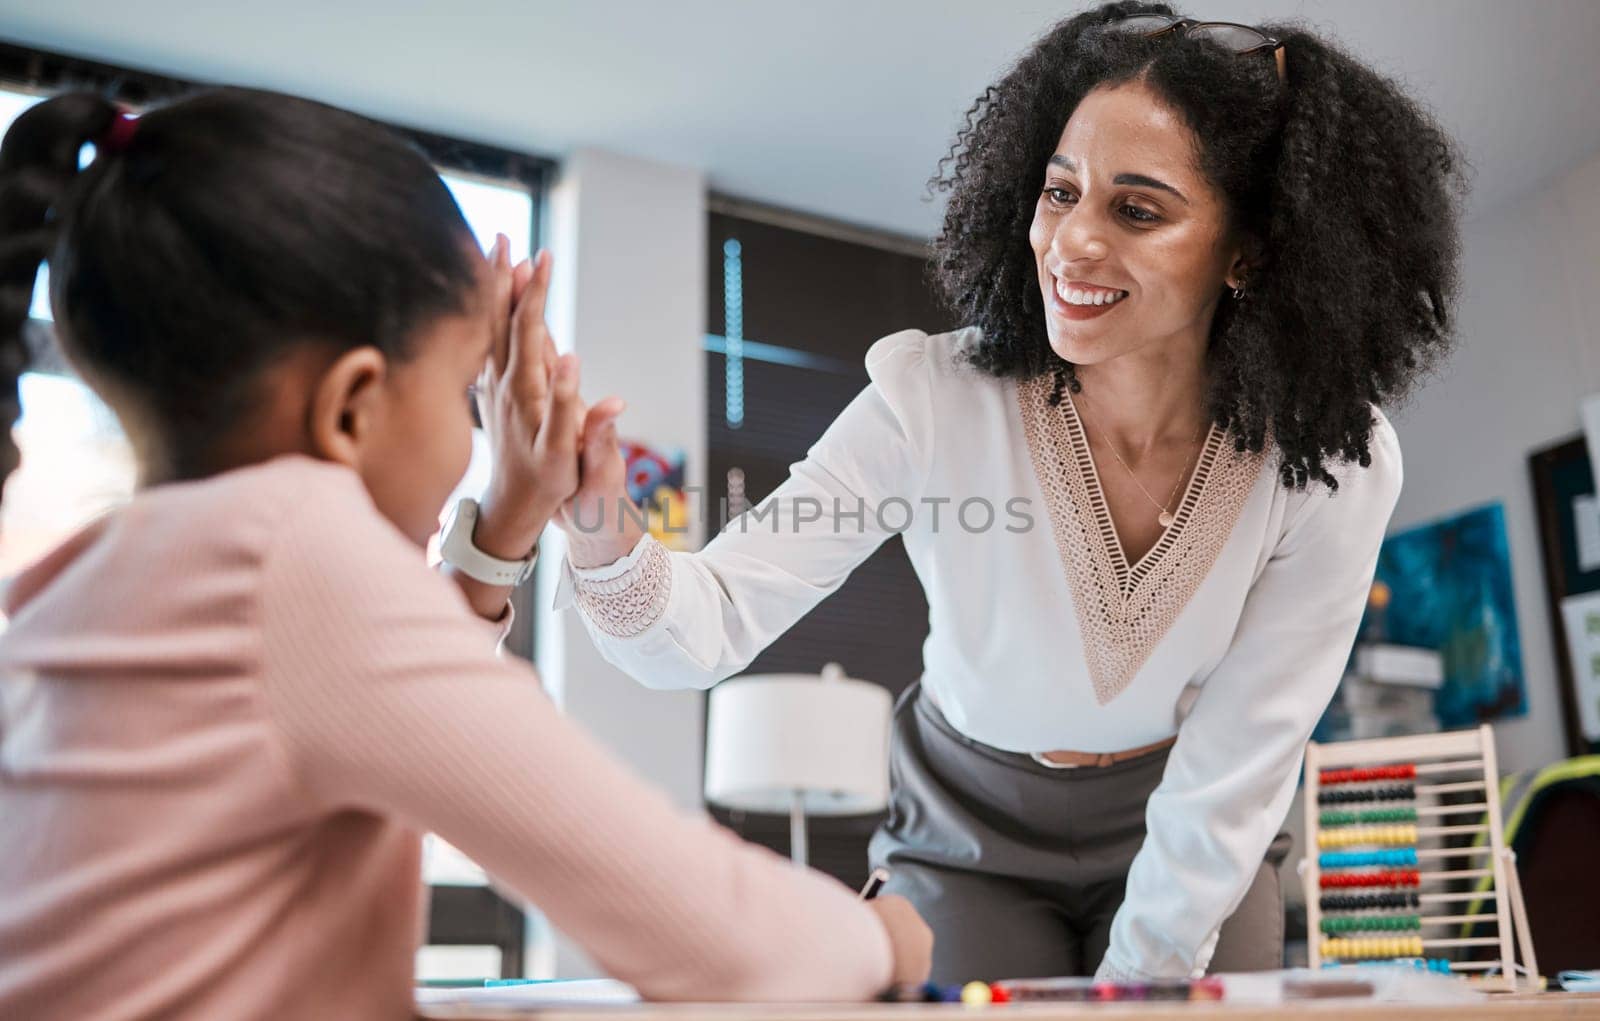 High five, success or teacher in celebration with a student in a classroom with learning development. Goals, education or happy black woman smiles teaching or celebrates a target with a school girl.